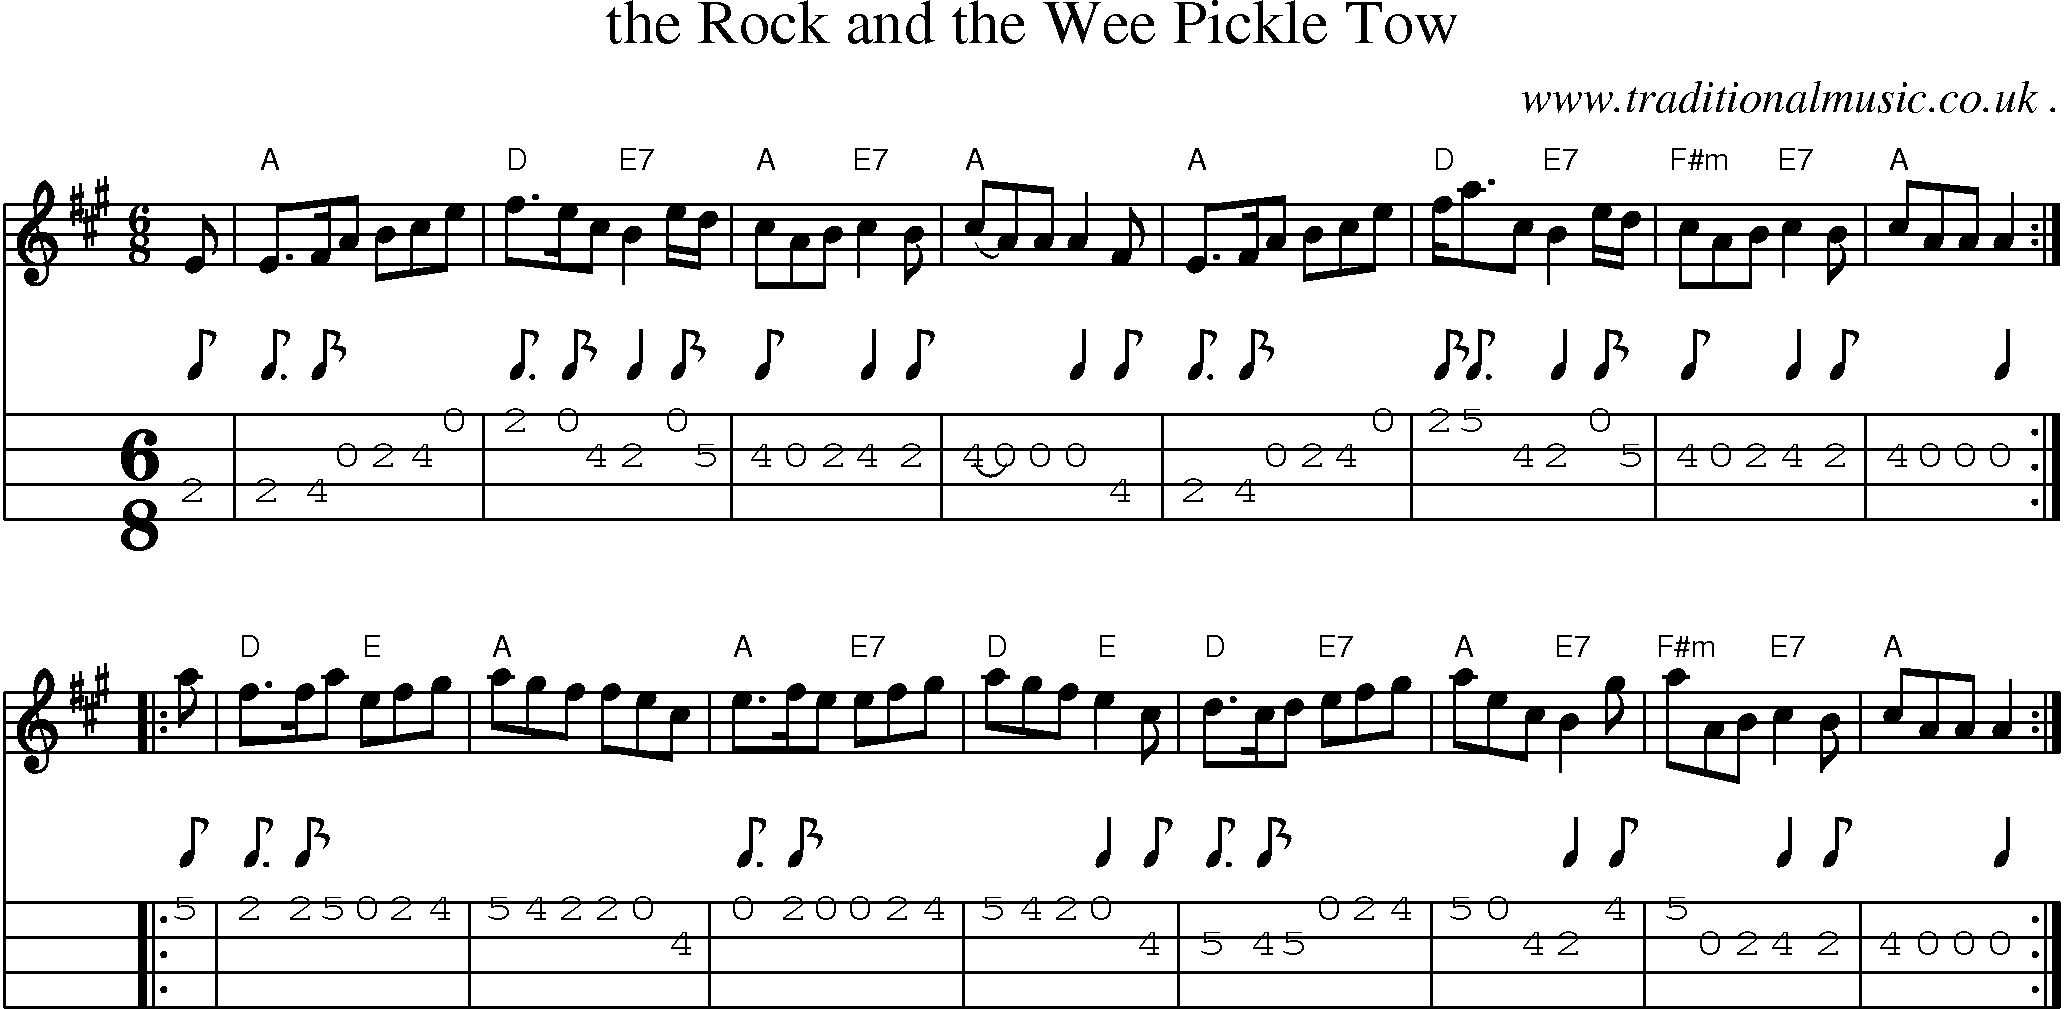 Sheet-music  score, Chords and Mandolin Tabs for The Rock And The Wee Pickle Tow